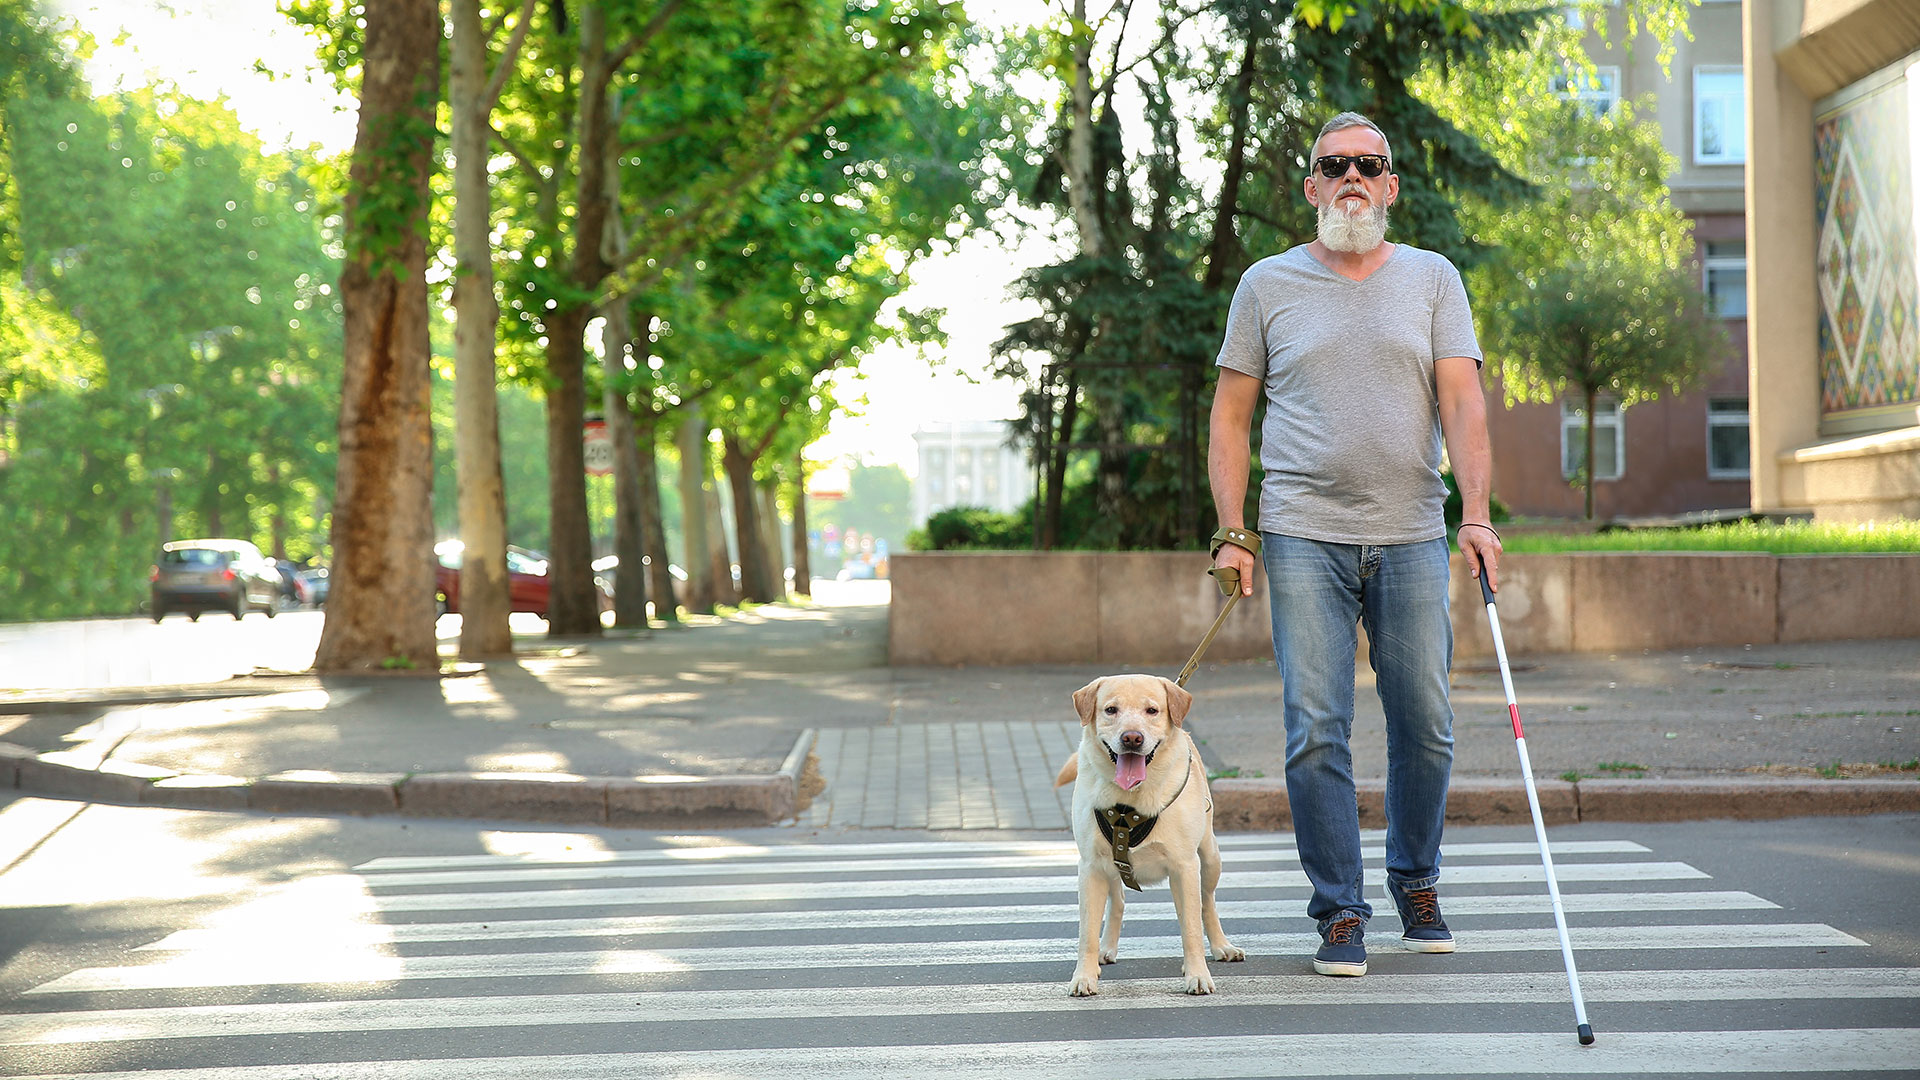 Blind man with guide dog crossing road